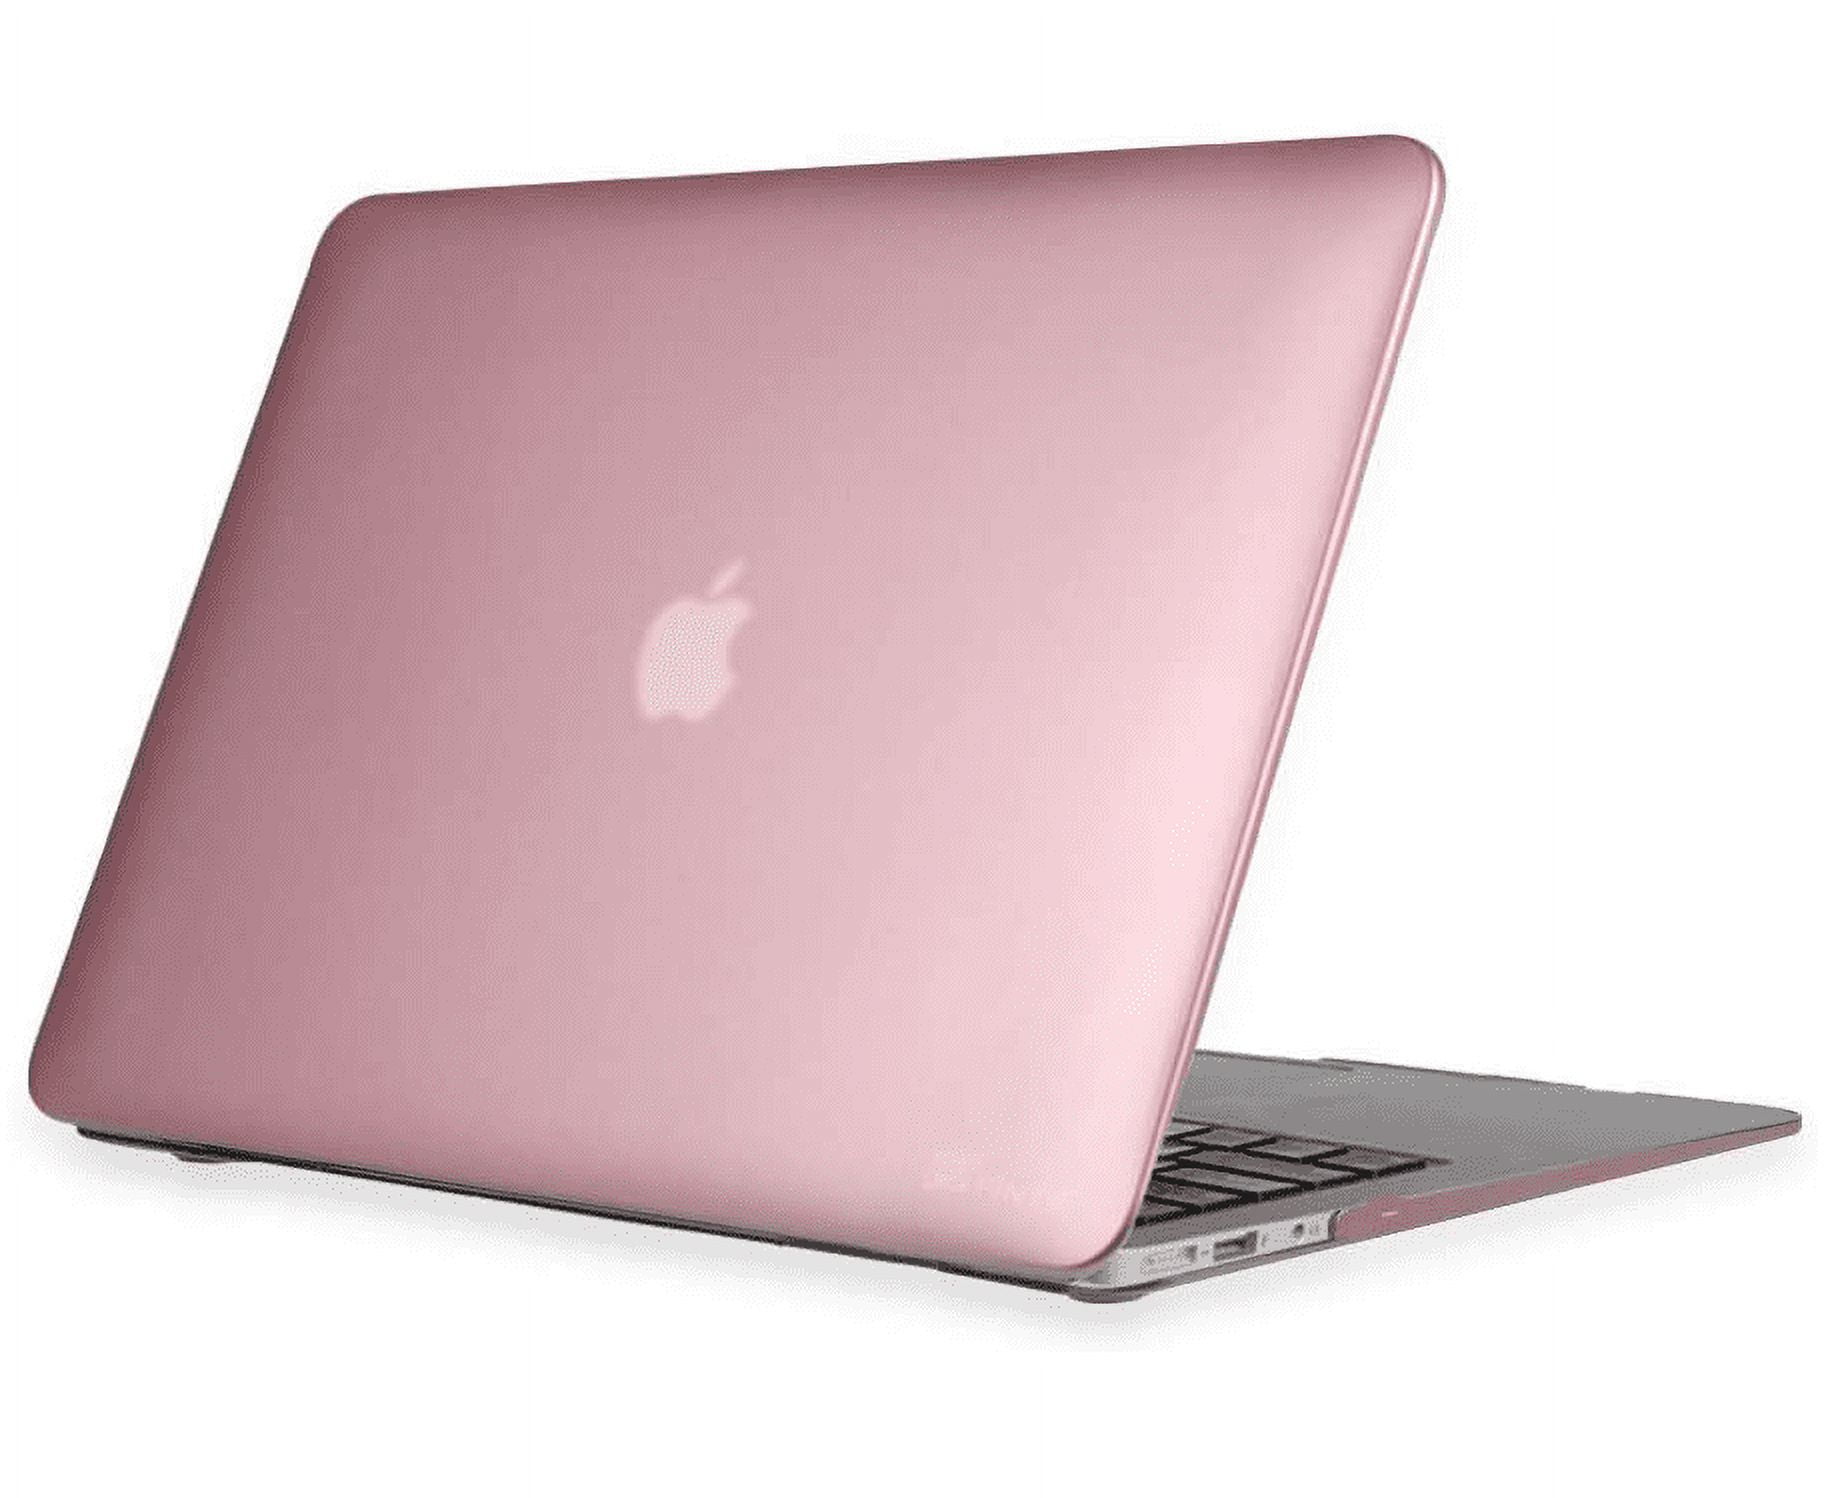 Fintie MacBook Air 13.3 Case (A1466 / A1369) - Snap On Hard Shell  Protective Cover, Rose Gold 